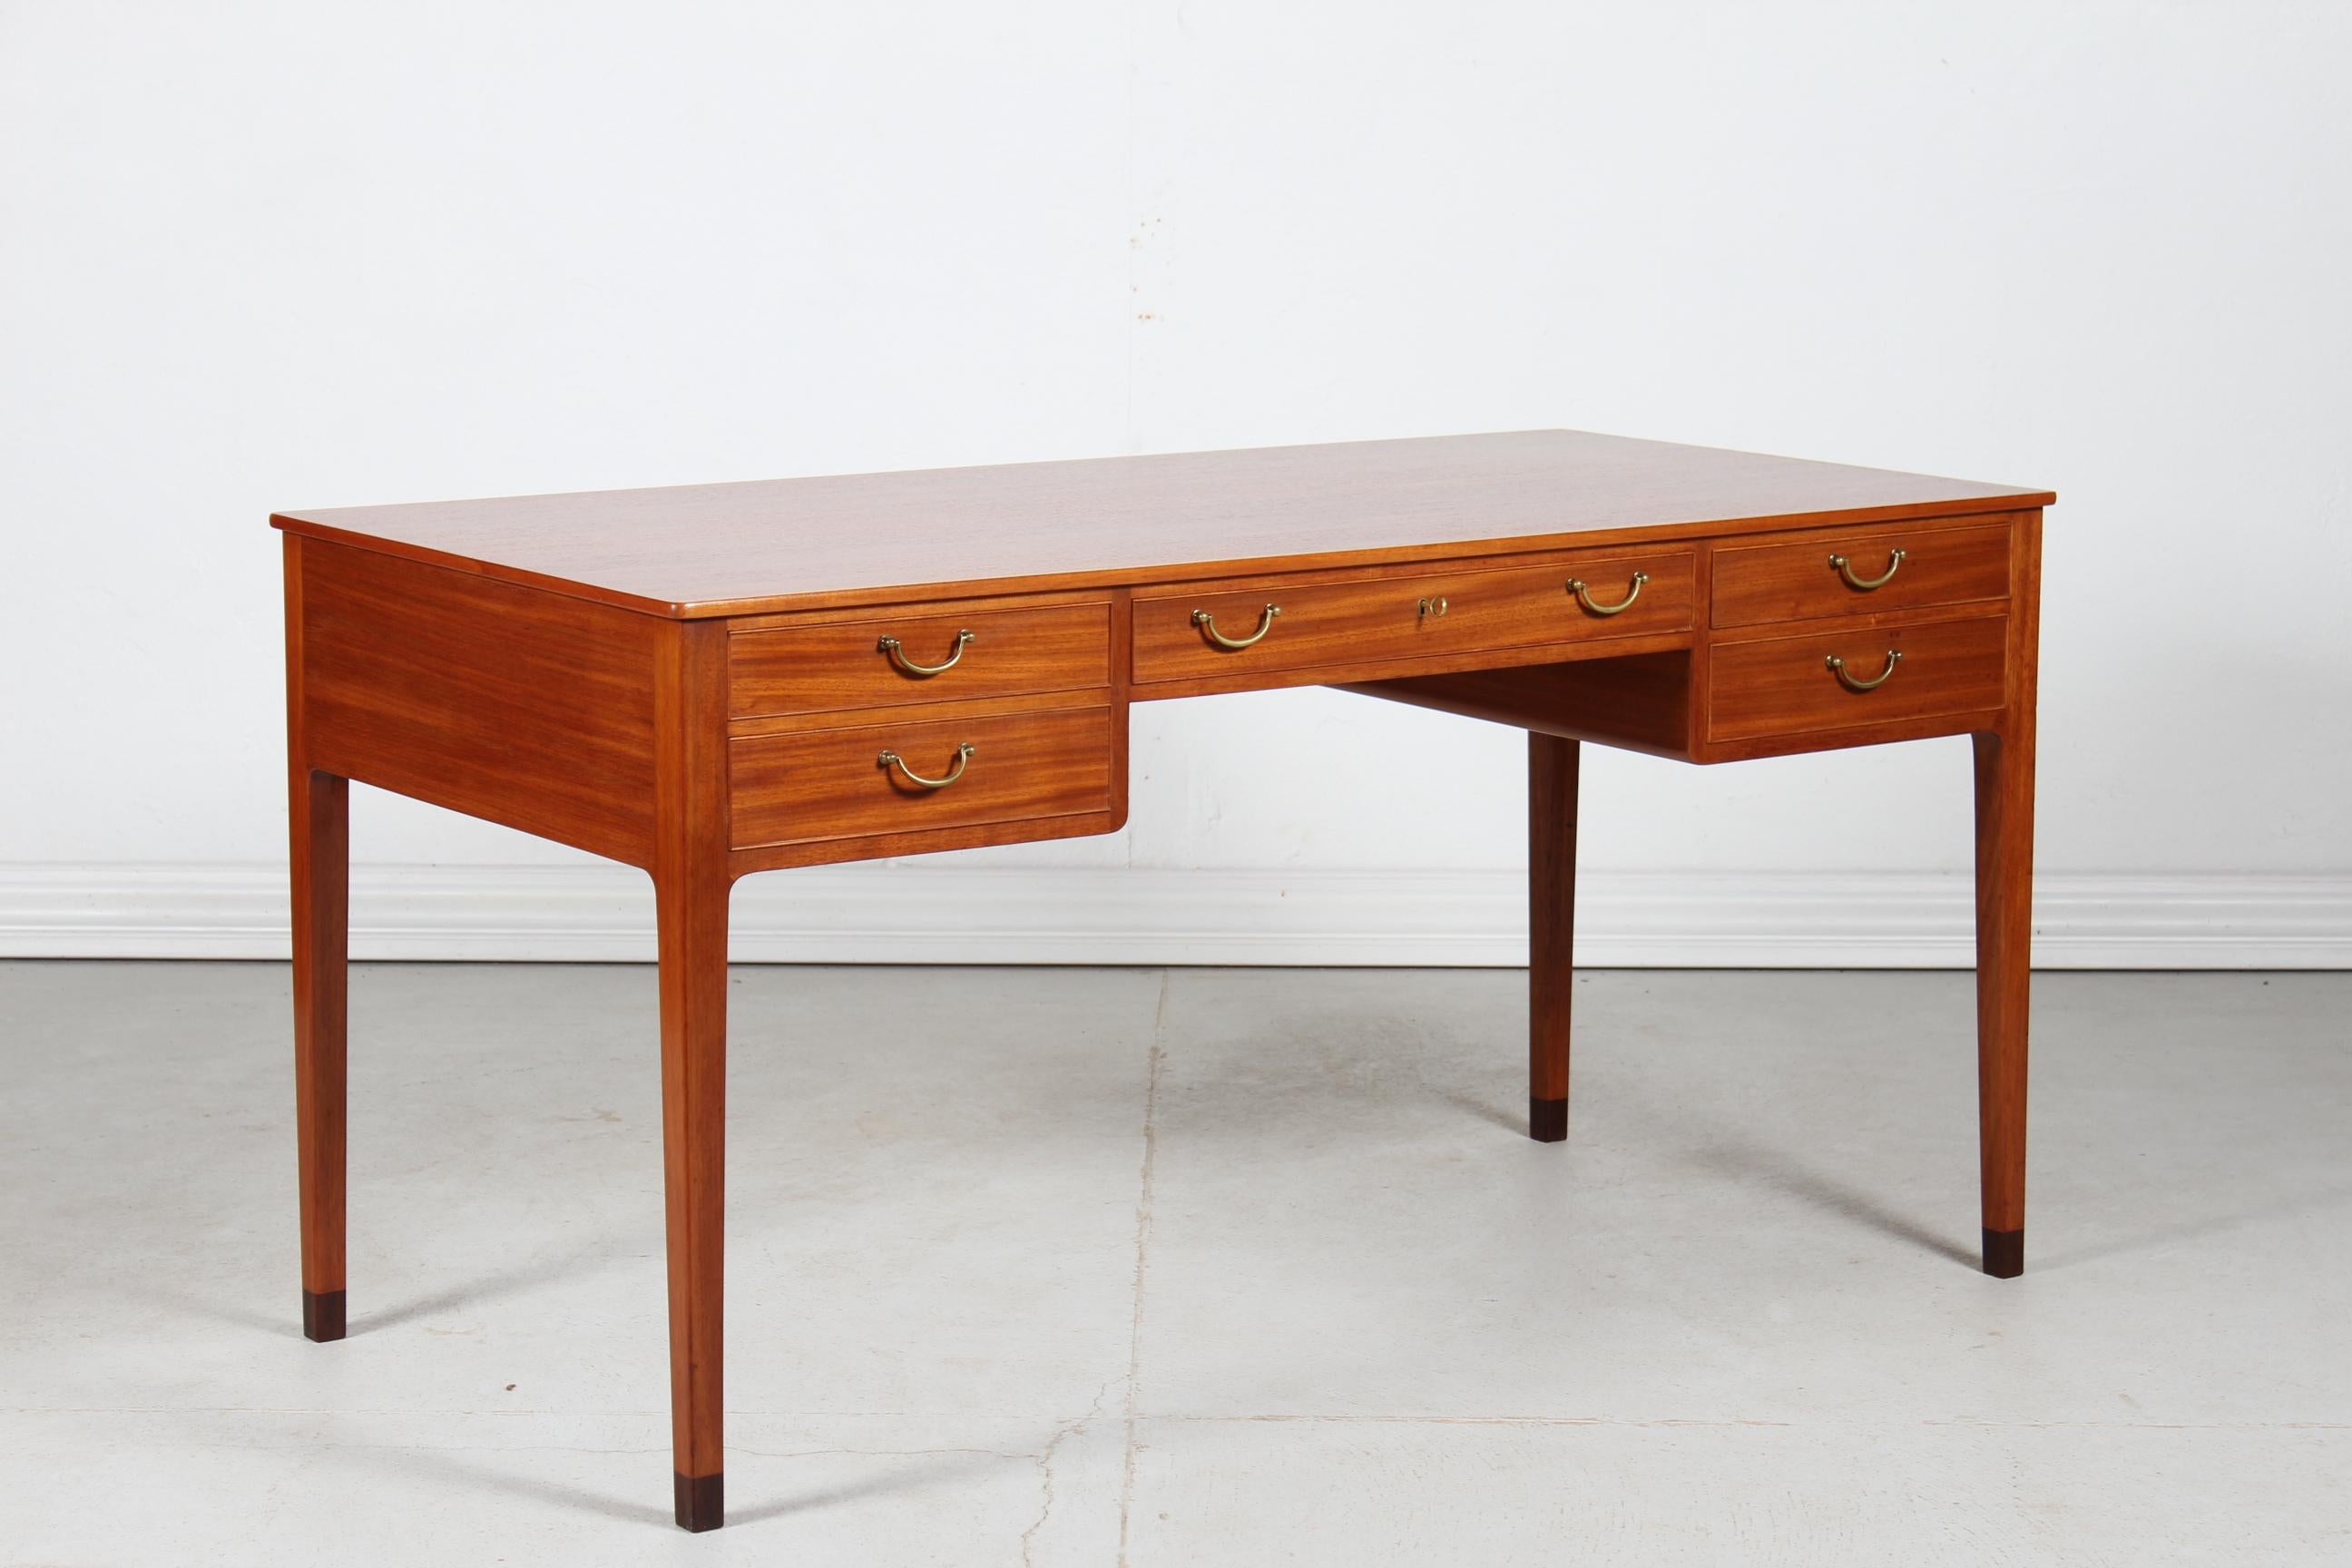 Free standing writing desk with 5 drawers designed by Ole Wanscher (1903-1985).
The desk is made of lacquered mahogany with inside frame of oak. 
The handles are made of solid brass and the original leg ends are mounted with dark wood.

It's